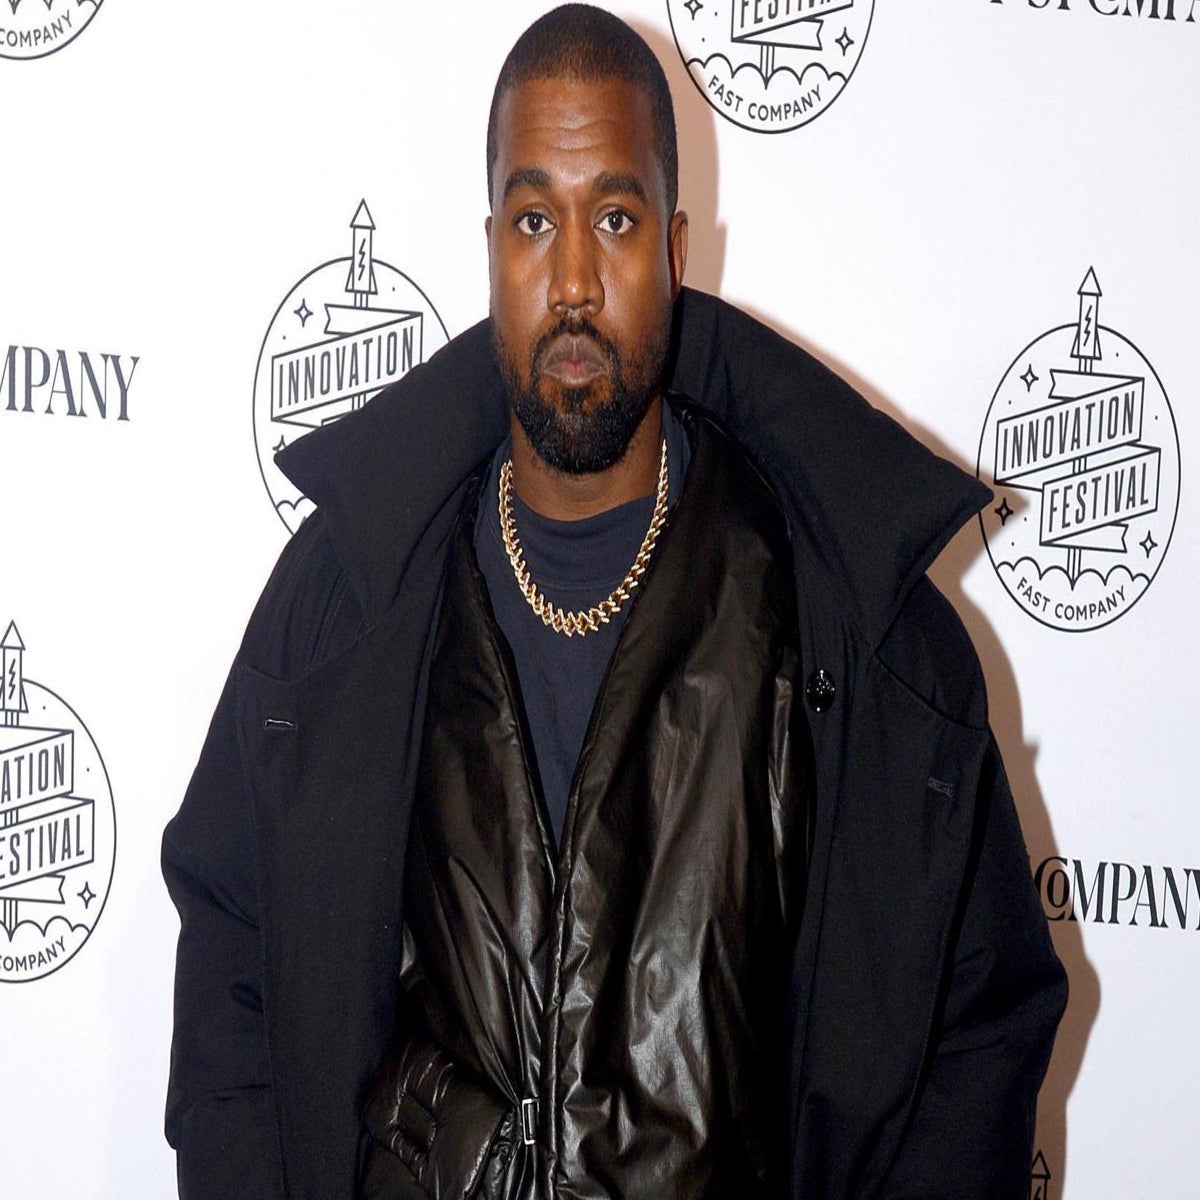 Kanye West Files Trademark for Blankets, Pillows, and Home Products